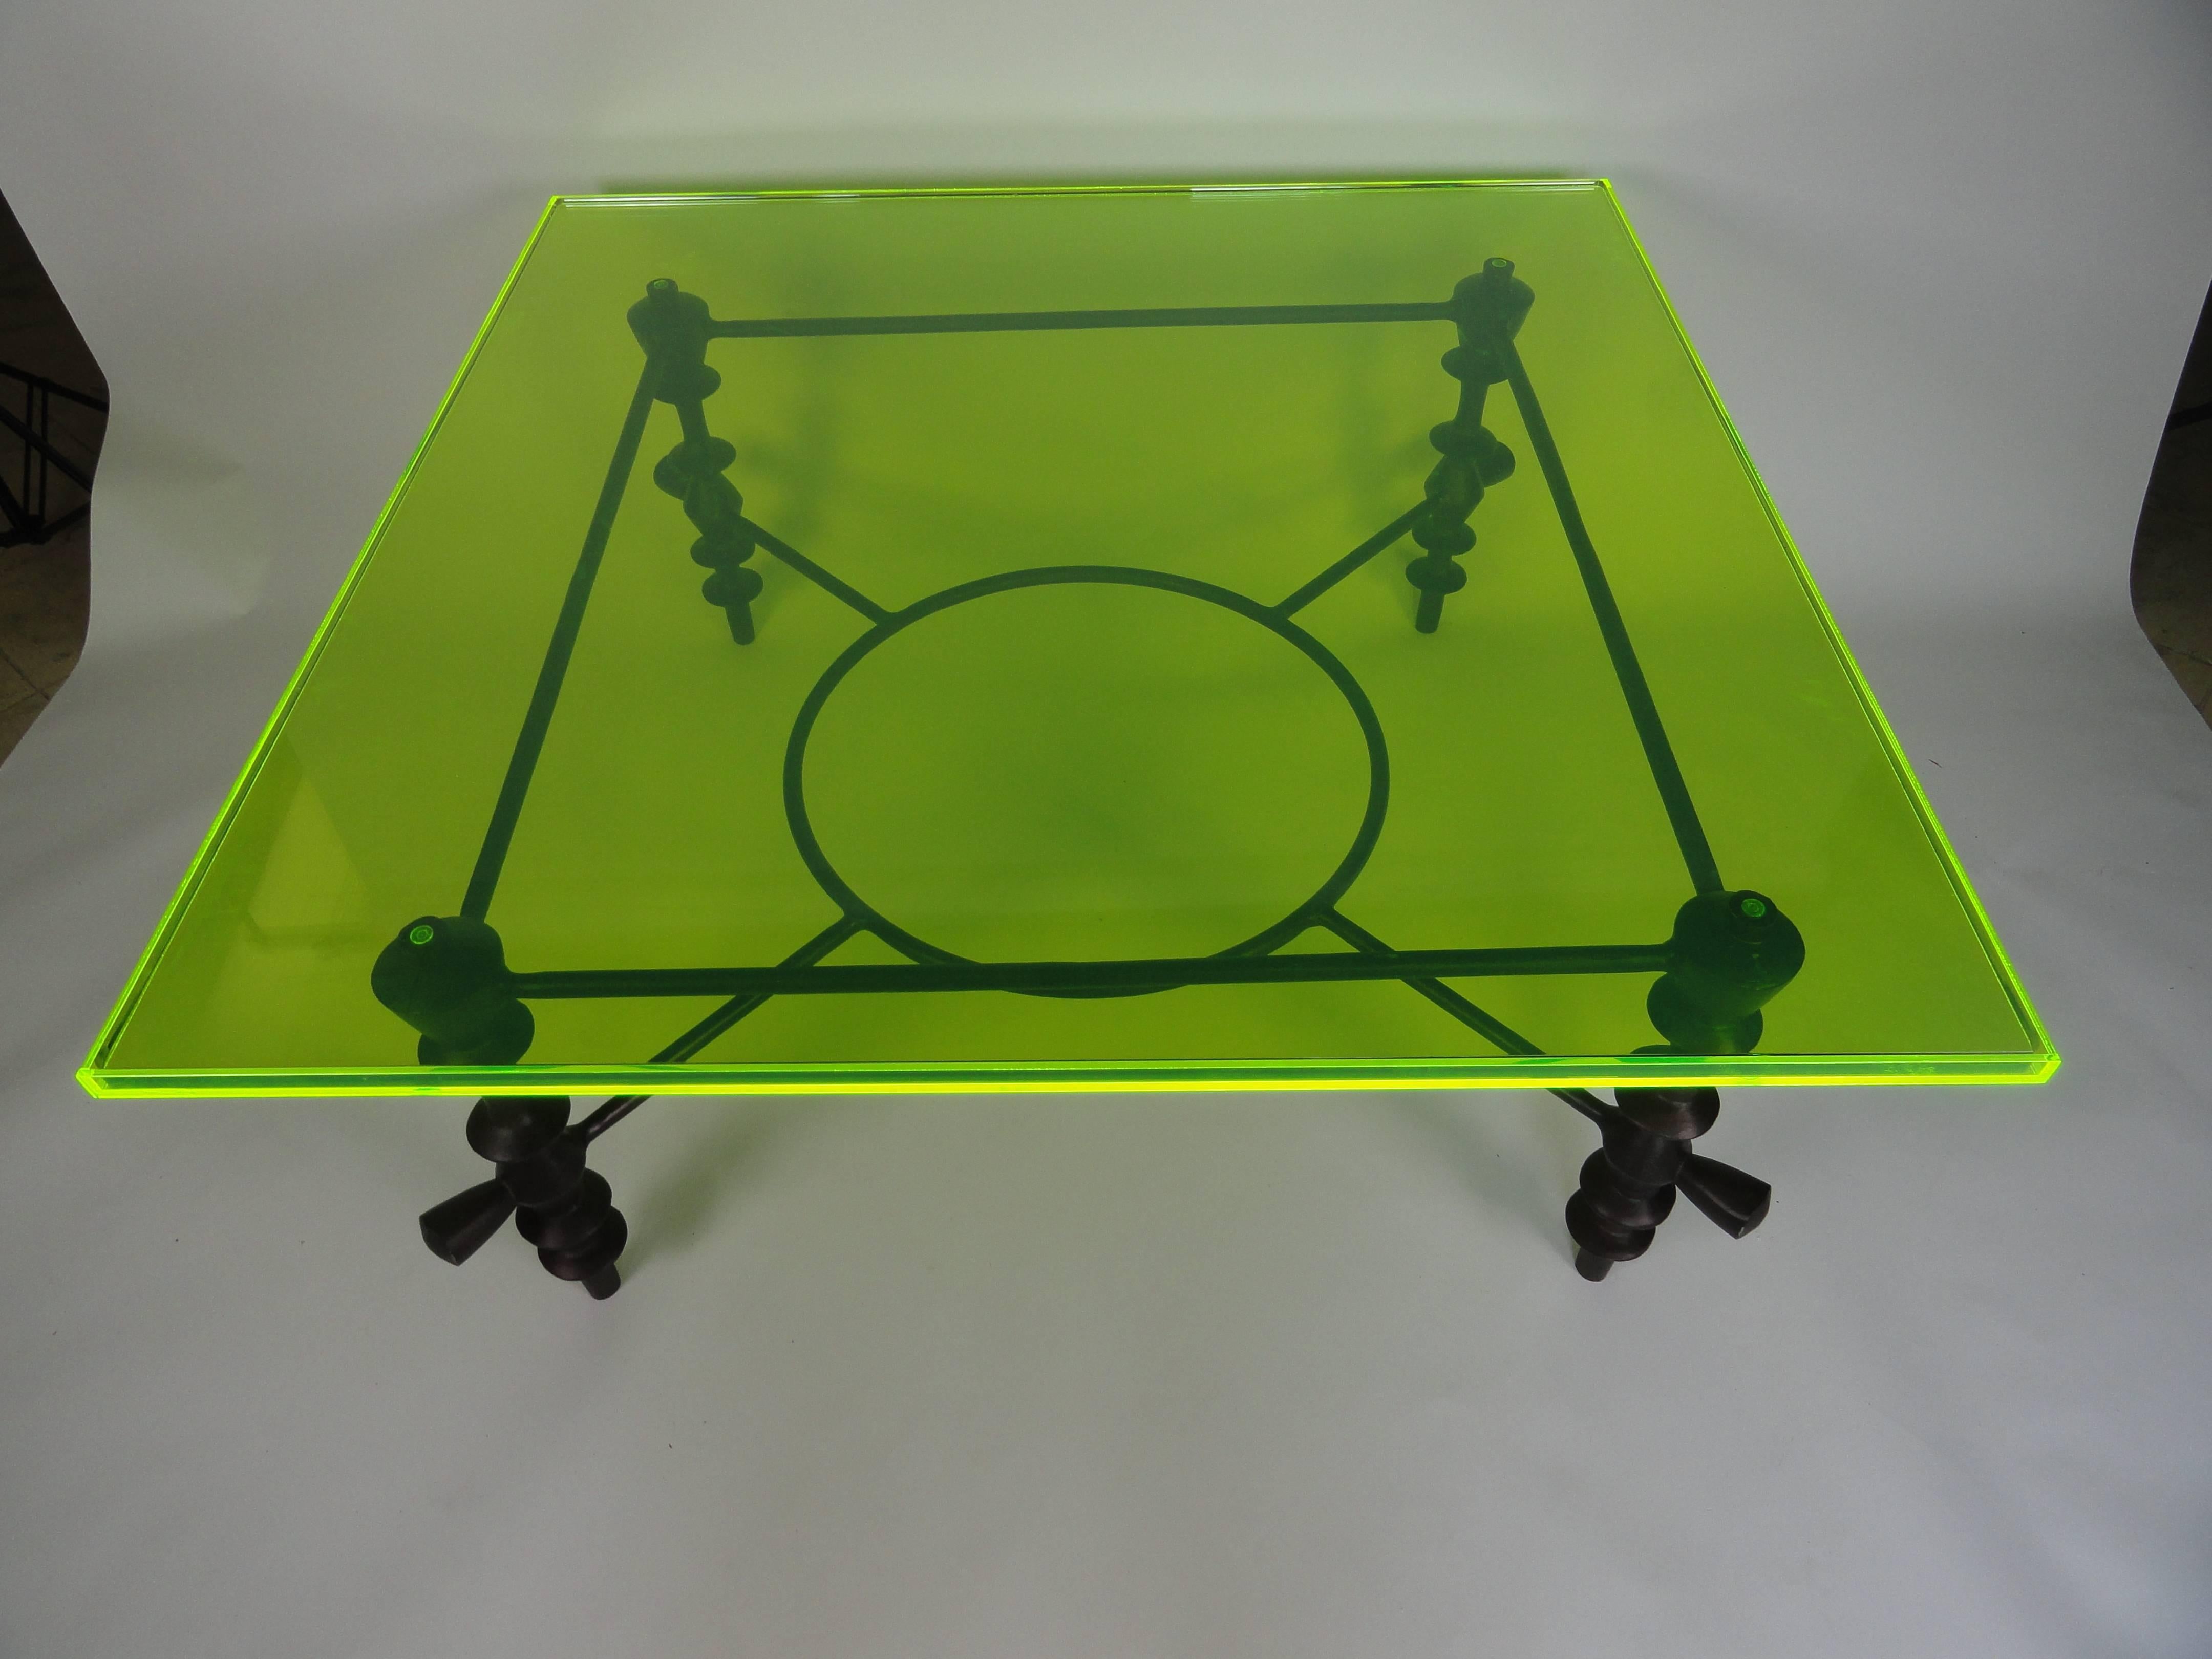 Giacometti style coffee table made of metal with a custom green acrylic top. The edges of the top absorb and refract any light which makes them appear to glow bright green. You can see it even with dim light. The acrylic tray top holds a thick piece